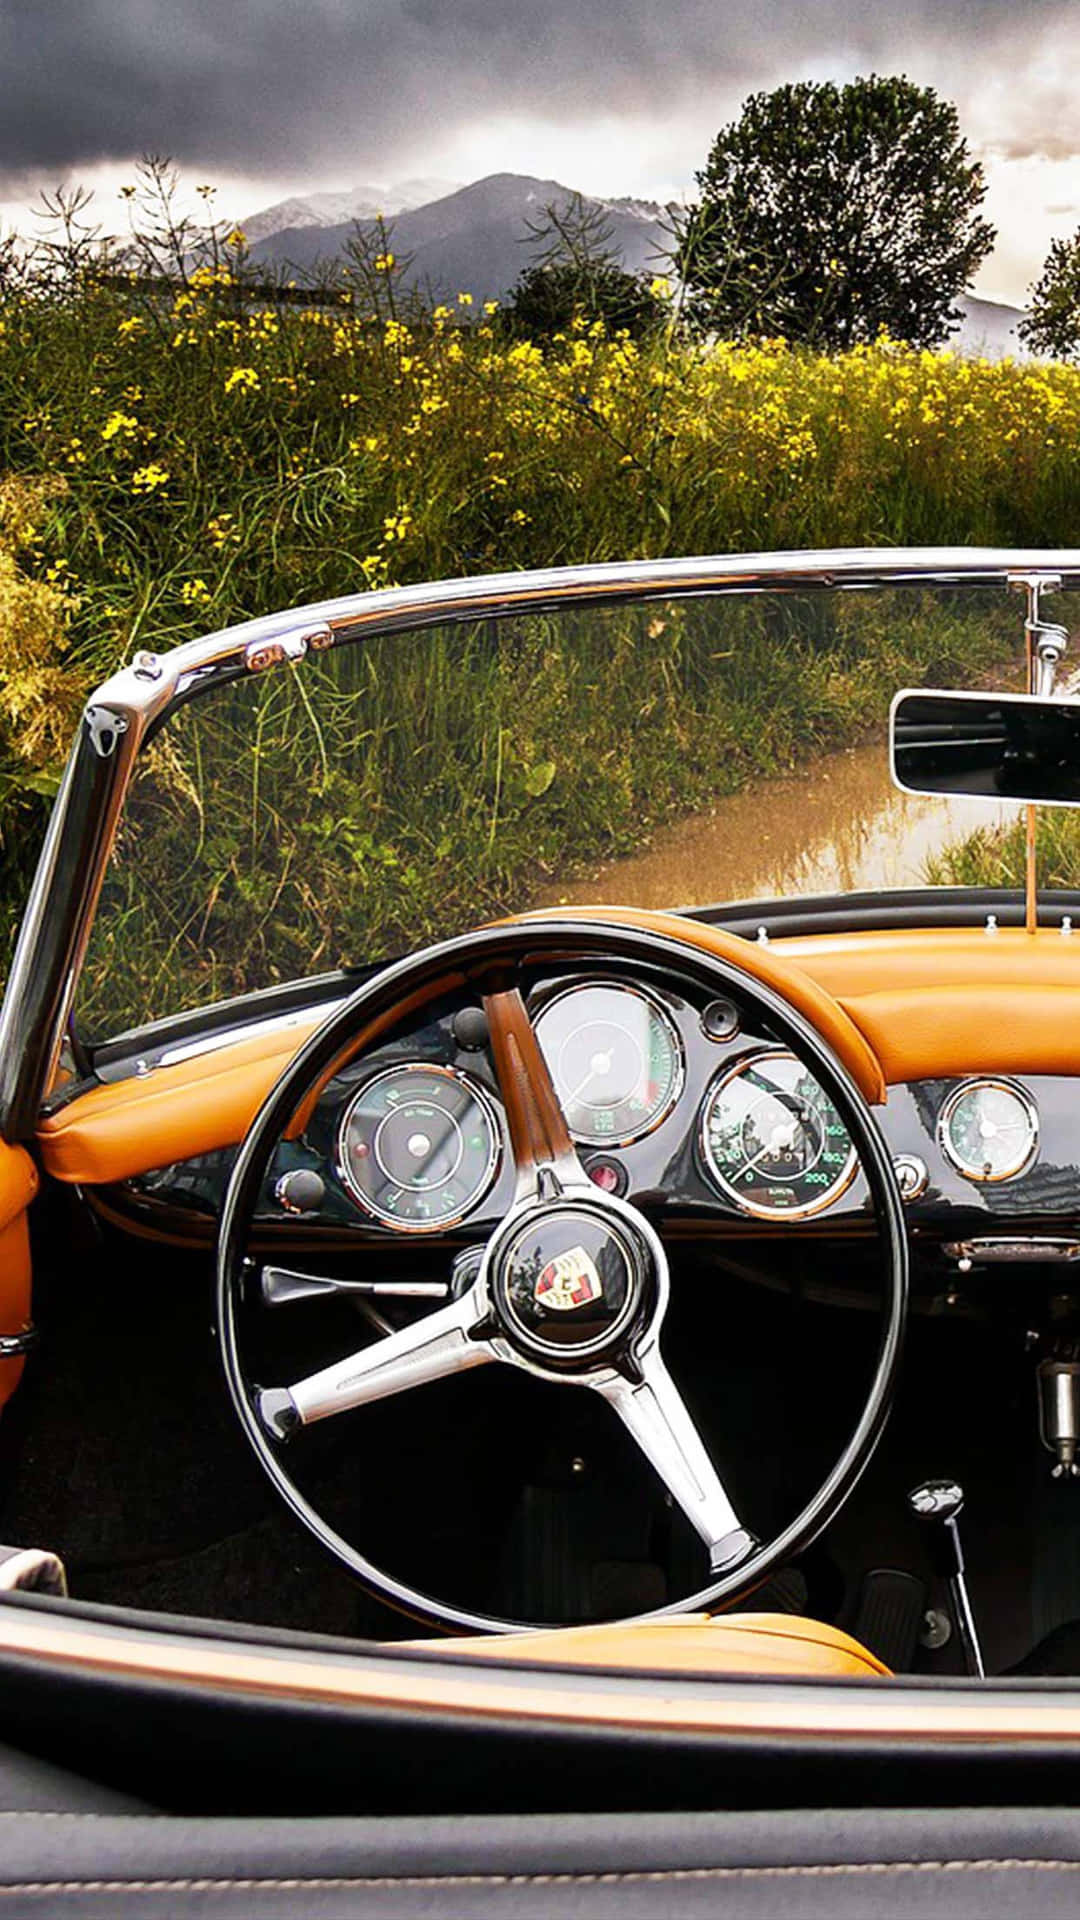 Get Behind the Wheel of History With a Vintage Car iPhone Wallpaper